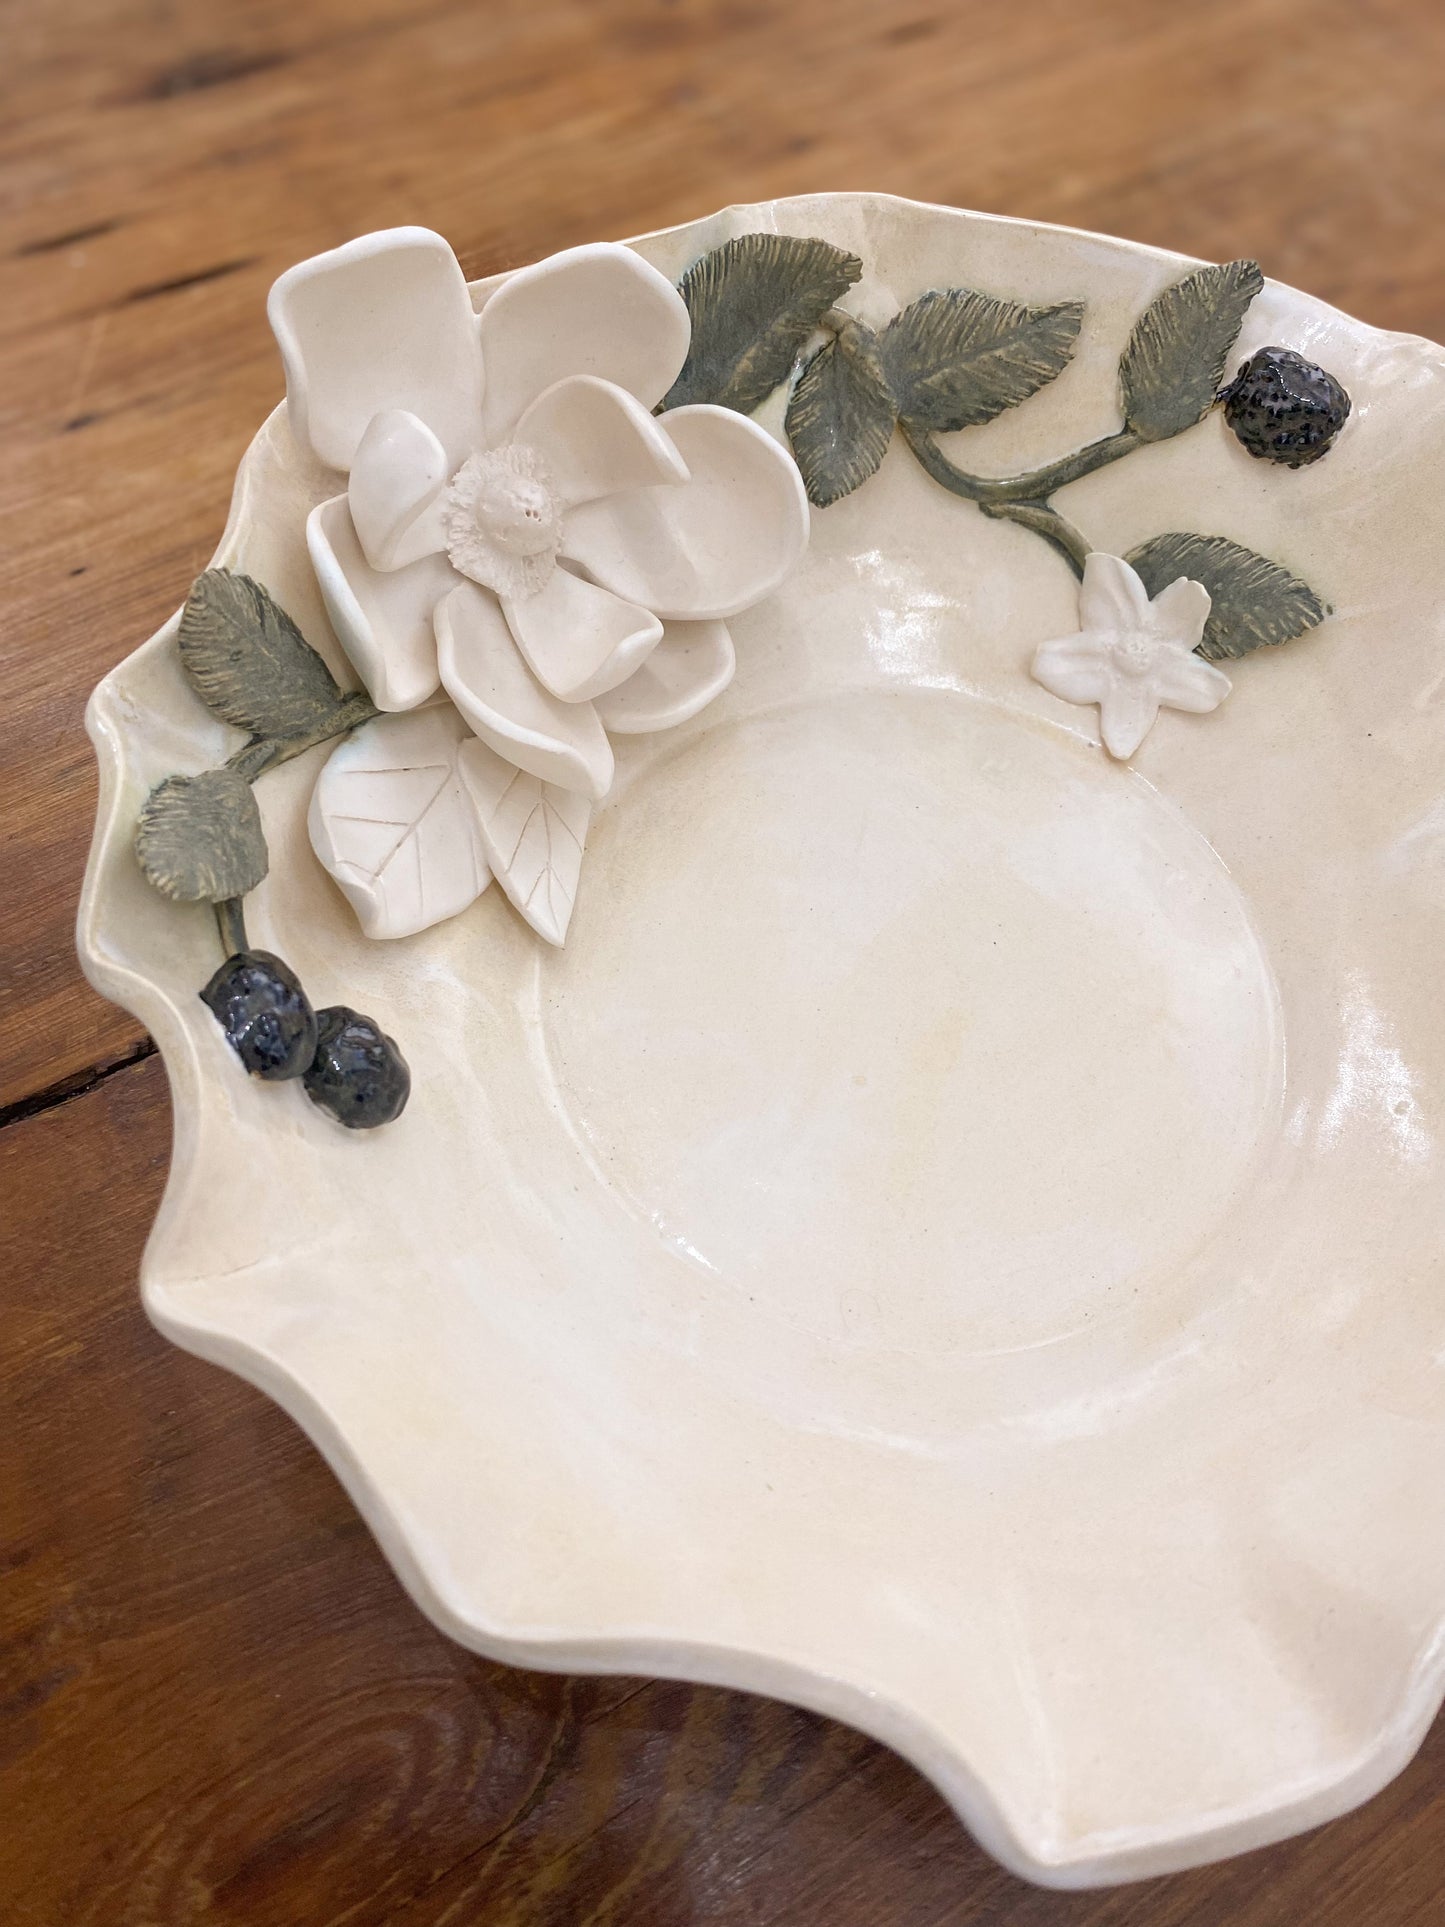 A In Full Bloom Series - Dewberry Bramble and Magnolia Sunday Bowl